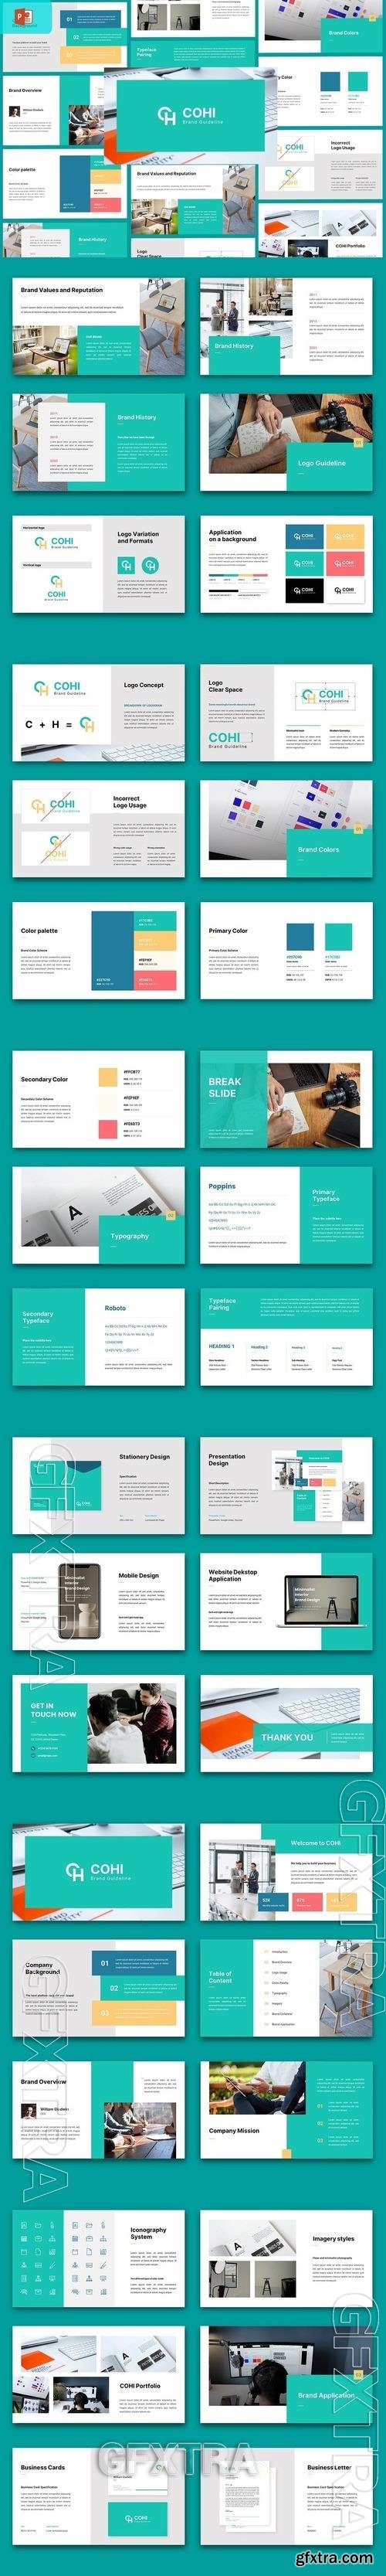 Cohi - Brand Guidelines Powerpoint Template A5HYDAU